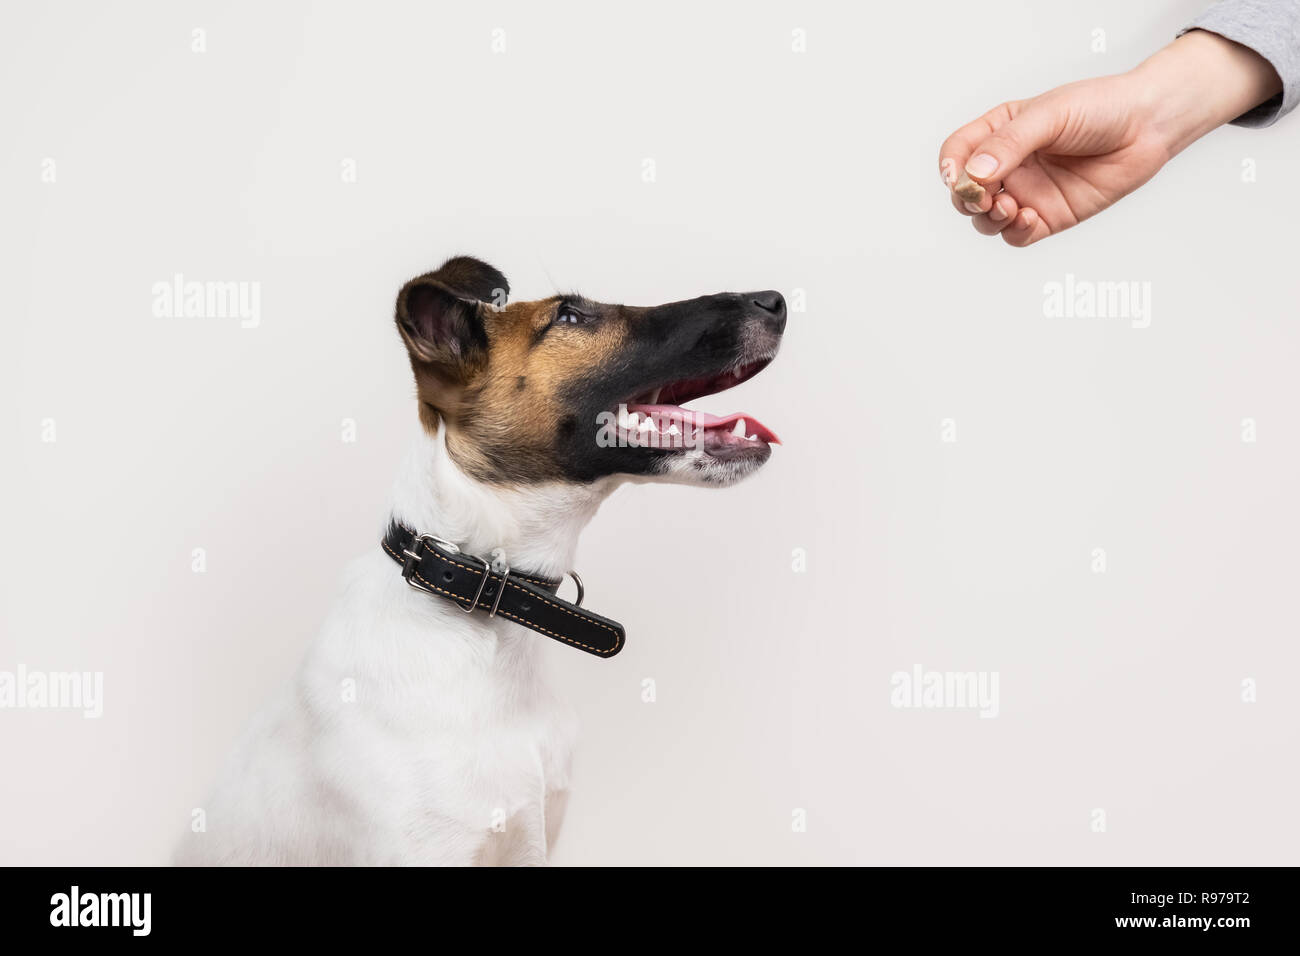 Clever fox terrier puppy taking a treet from human, isolated background. Cute little dog looks at human hand giving him a cookie. Stock Photo